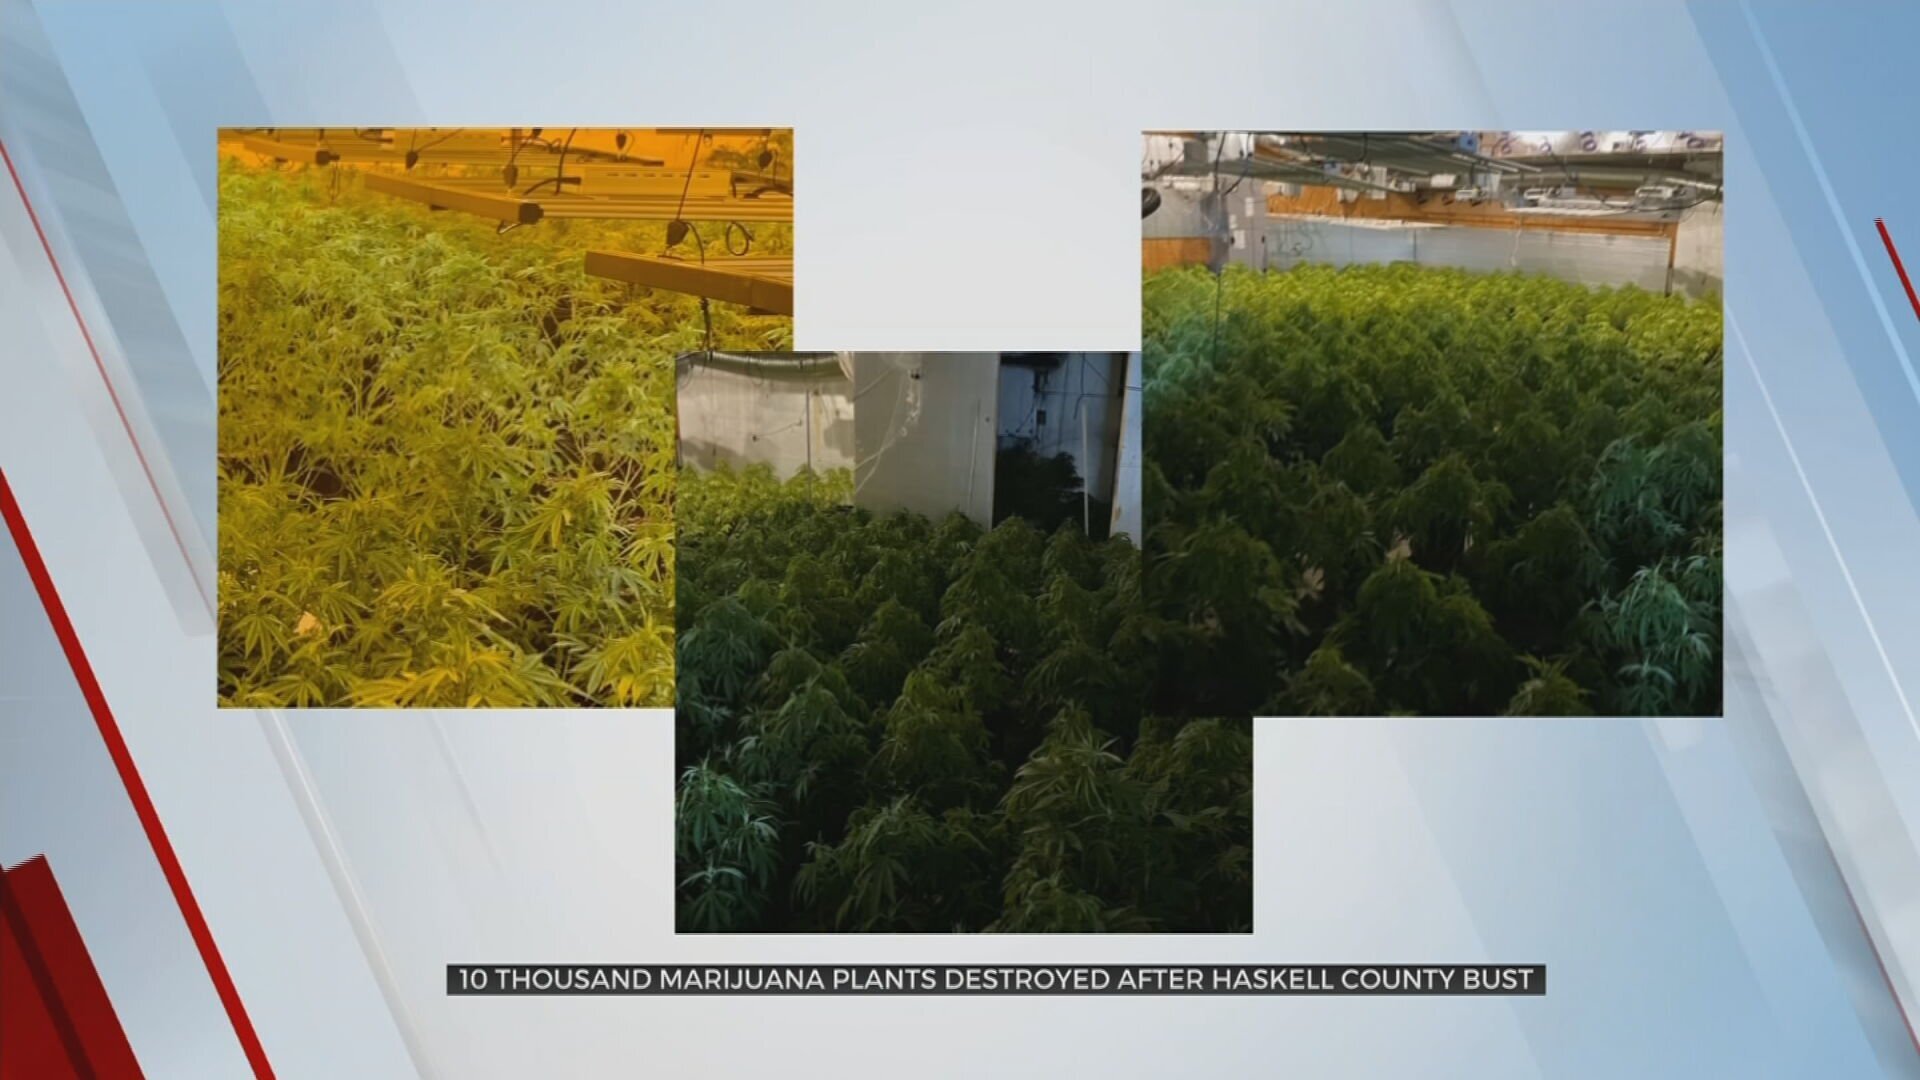 More Than 10,000 Marijuana Plants Seized, 2 Arrested In Haskell County Bust 